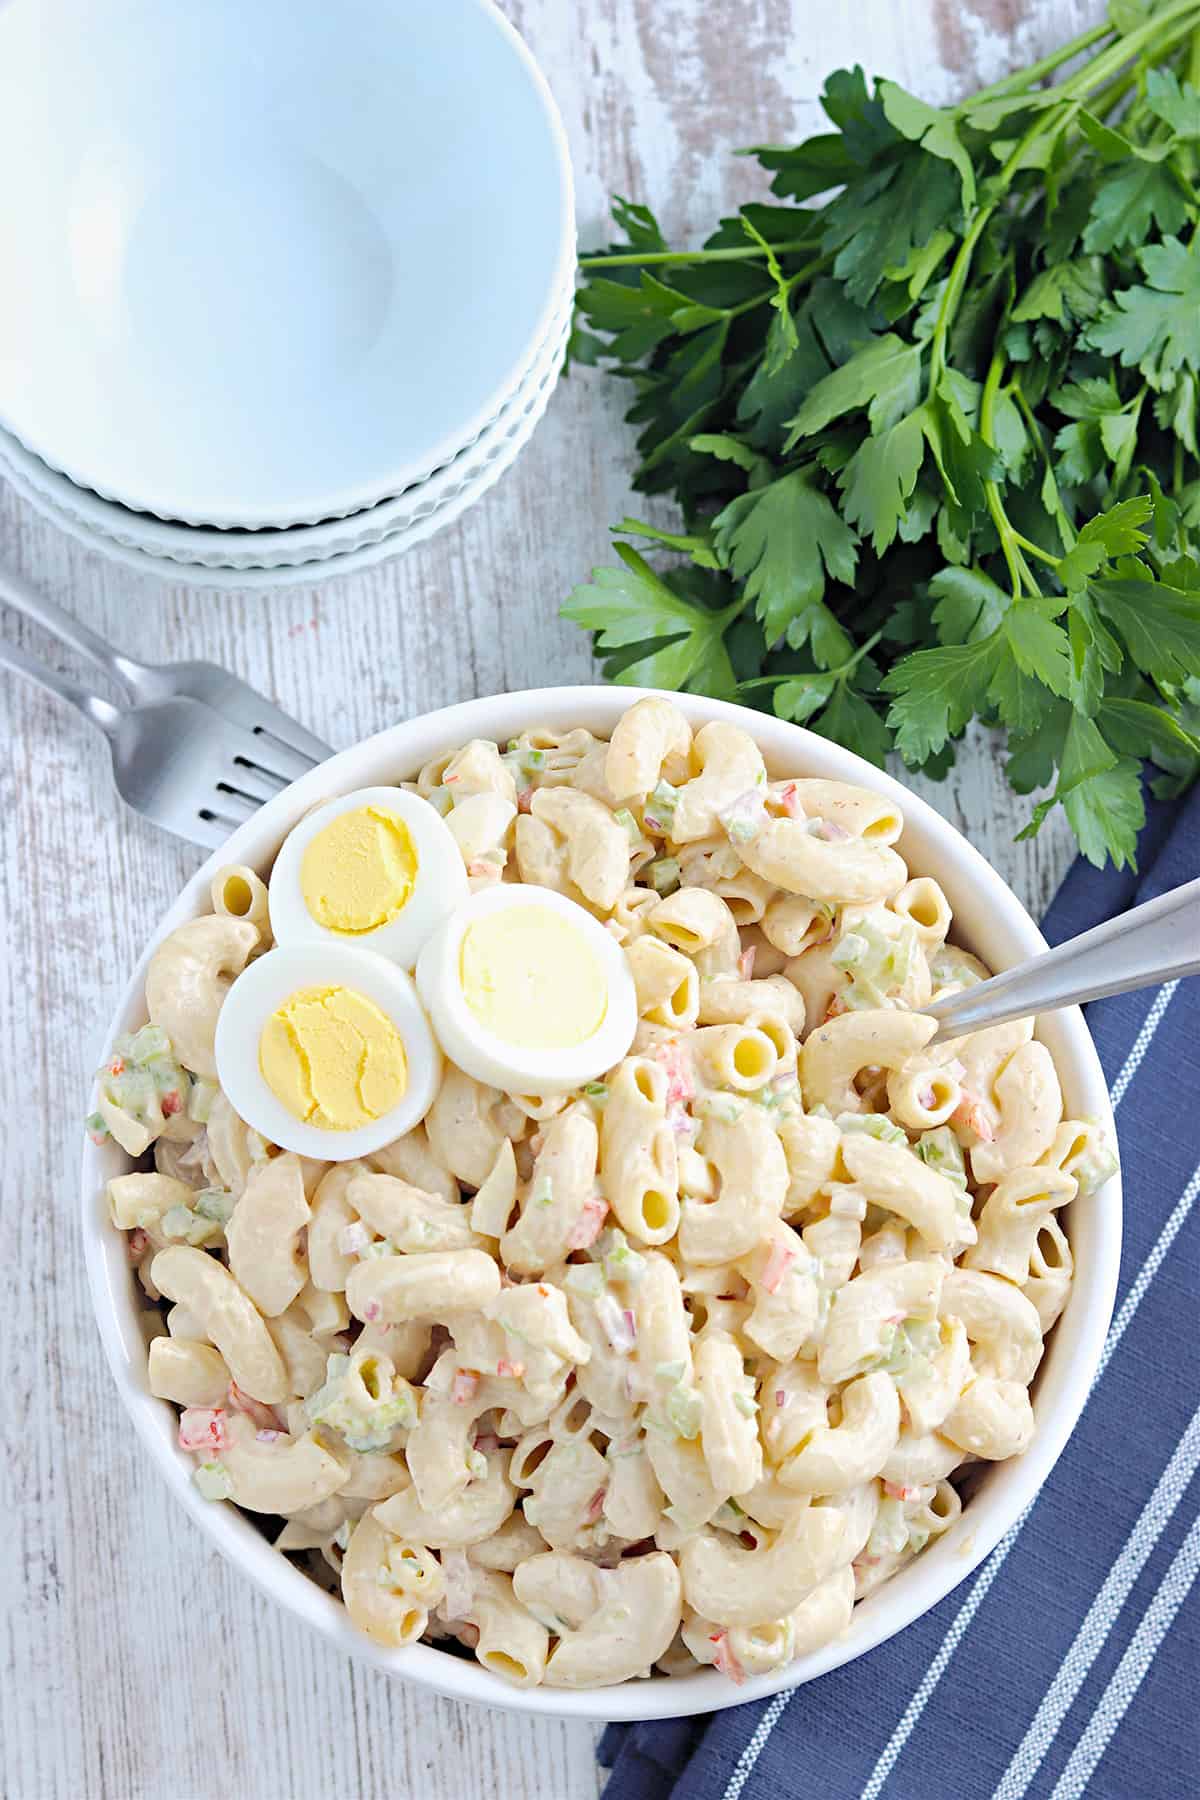 Finished macaroni salad in a white serving bowl.